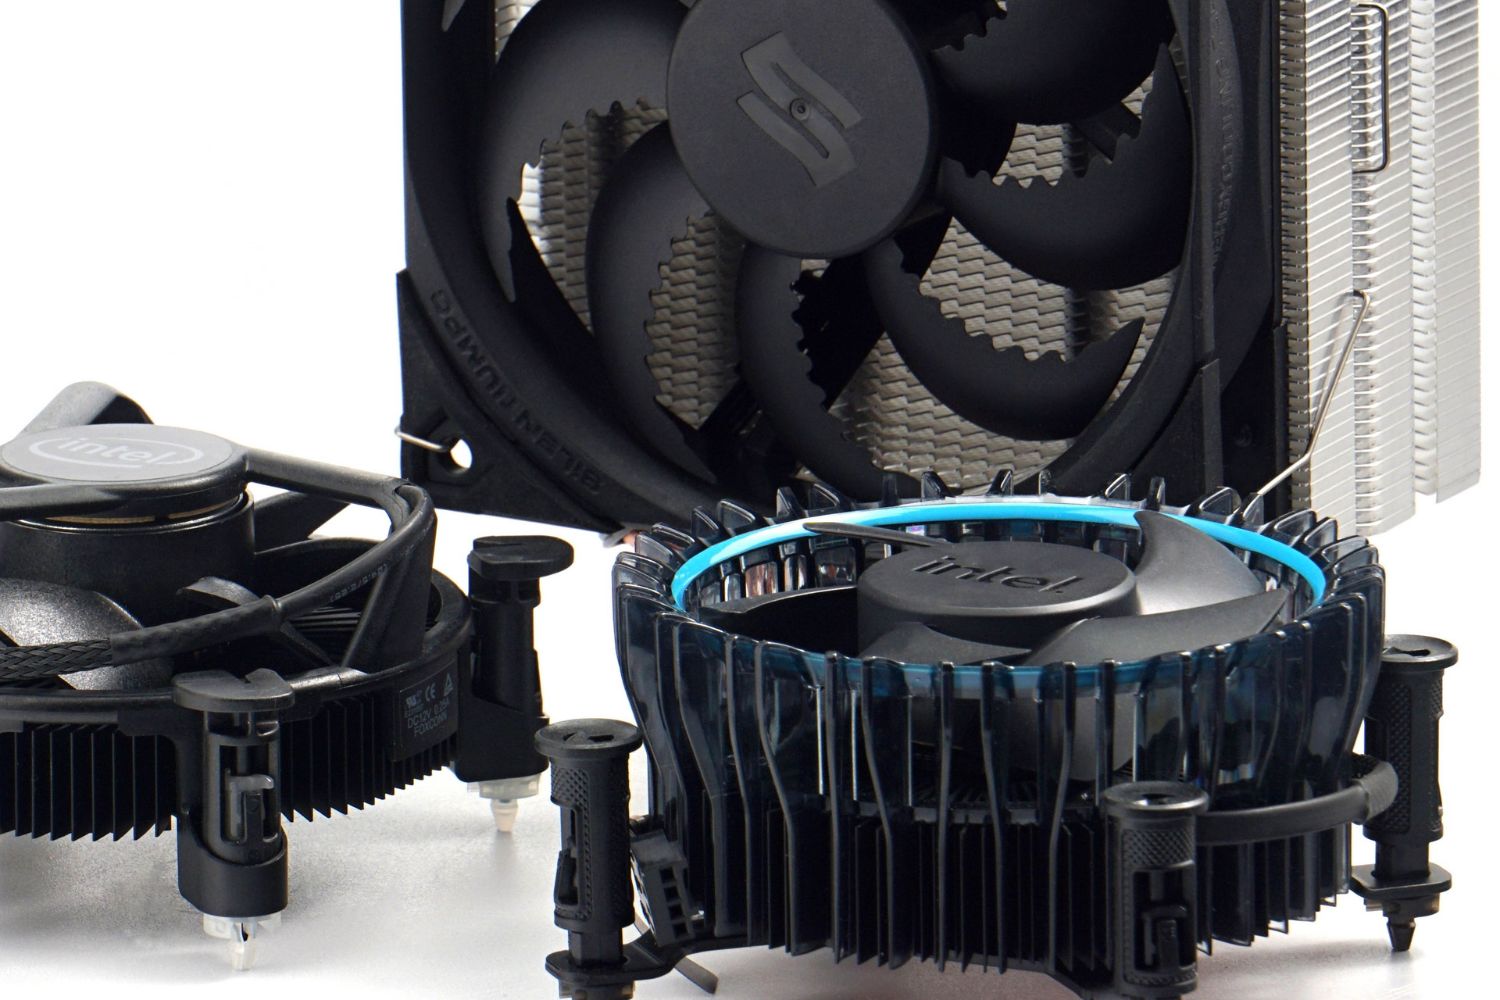 How To Install CPU Cooler On Intel